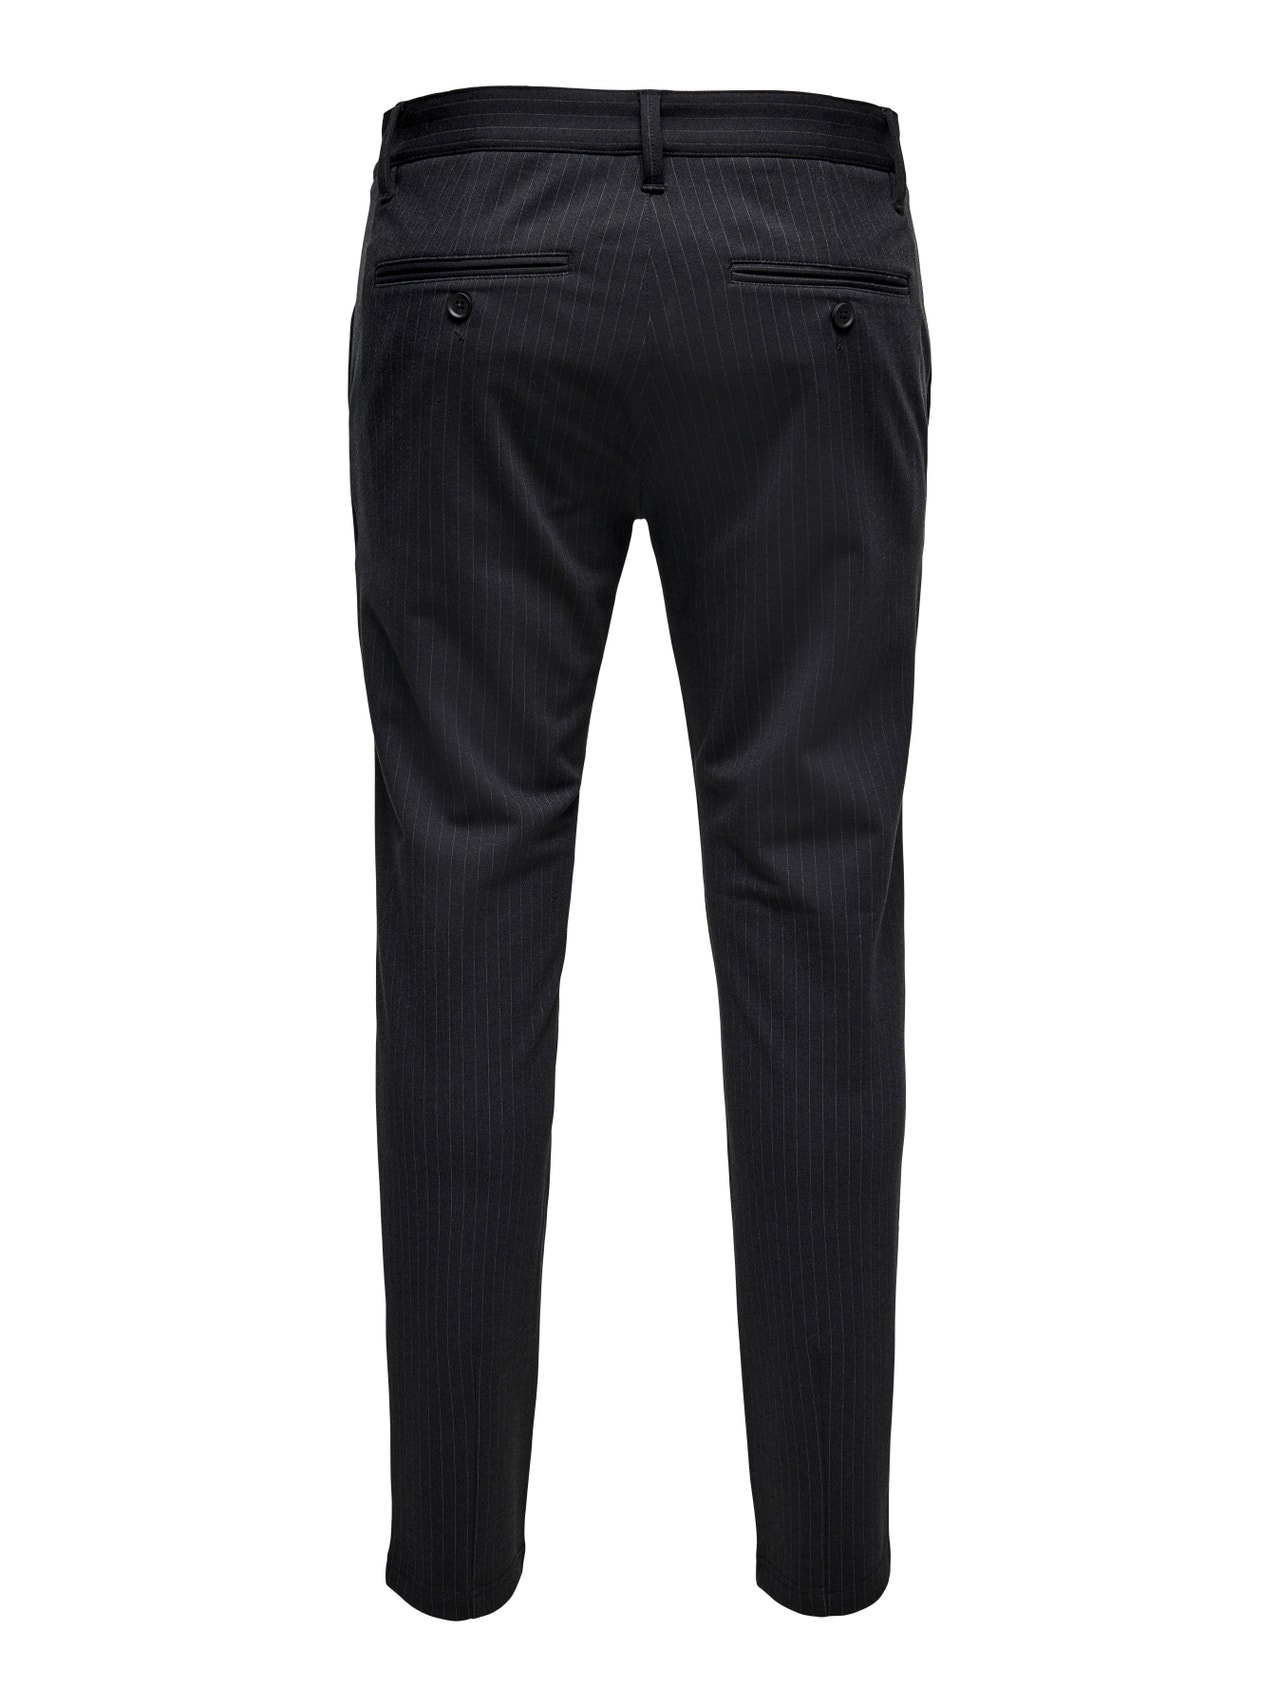 ONLY & SONS Classic striped trousers -Black - 22013727